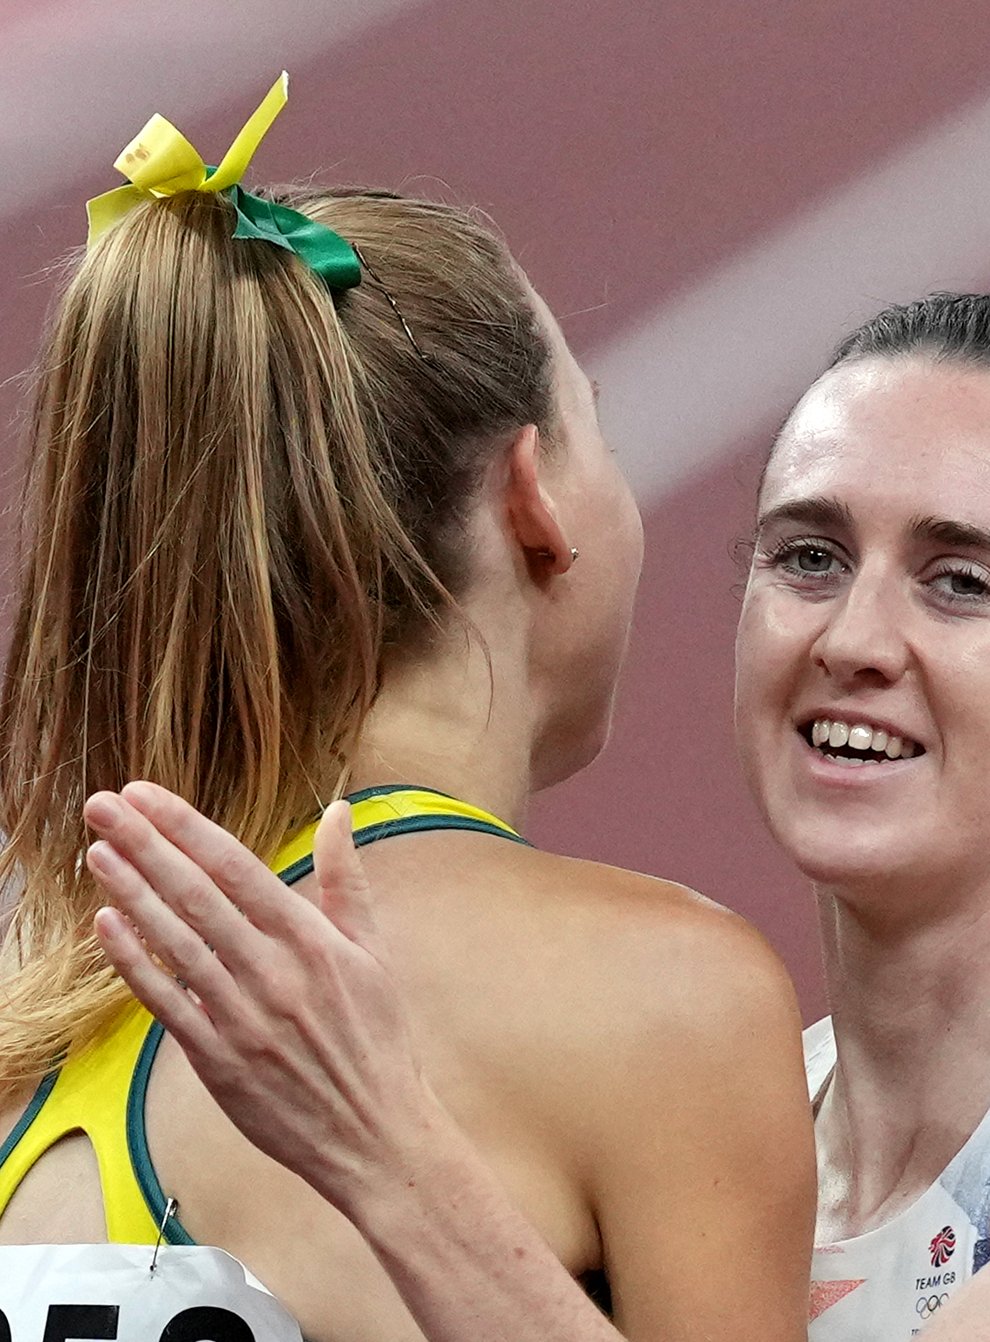 Laura Muir, right, was second in the 1500m semi-final and lines up in the final on Friday (Martin Rickett/PA)